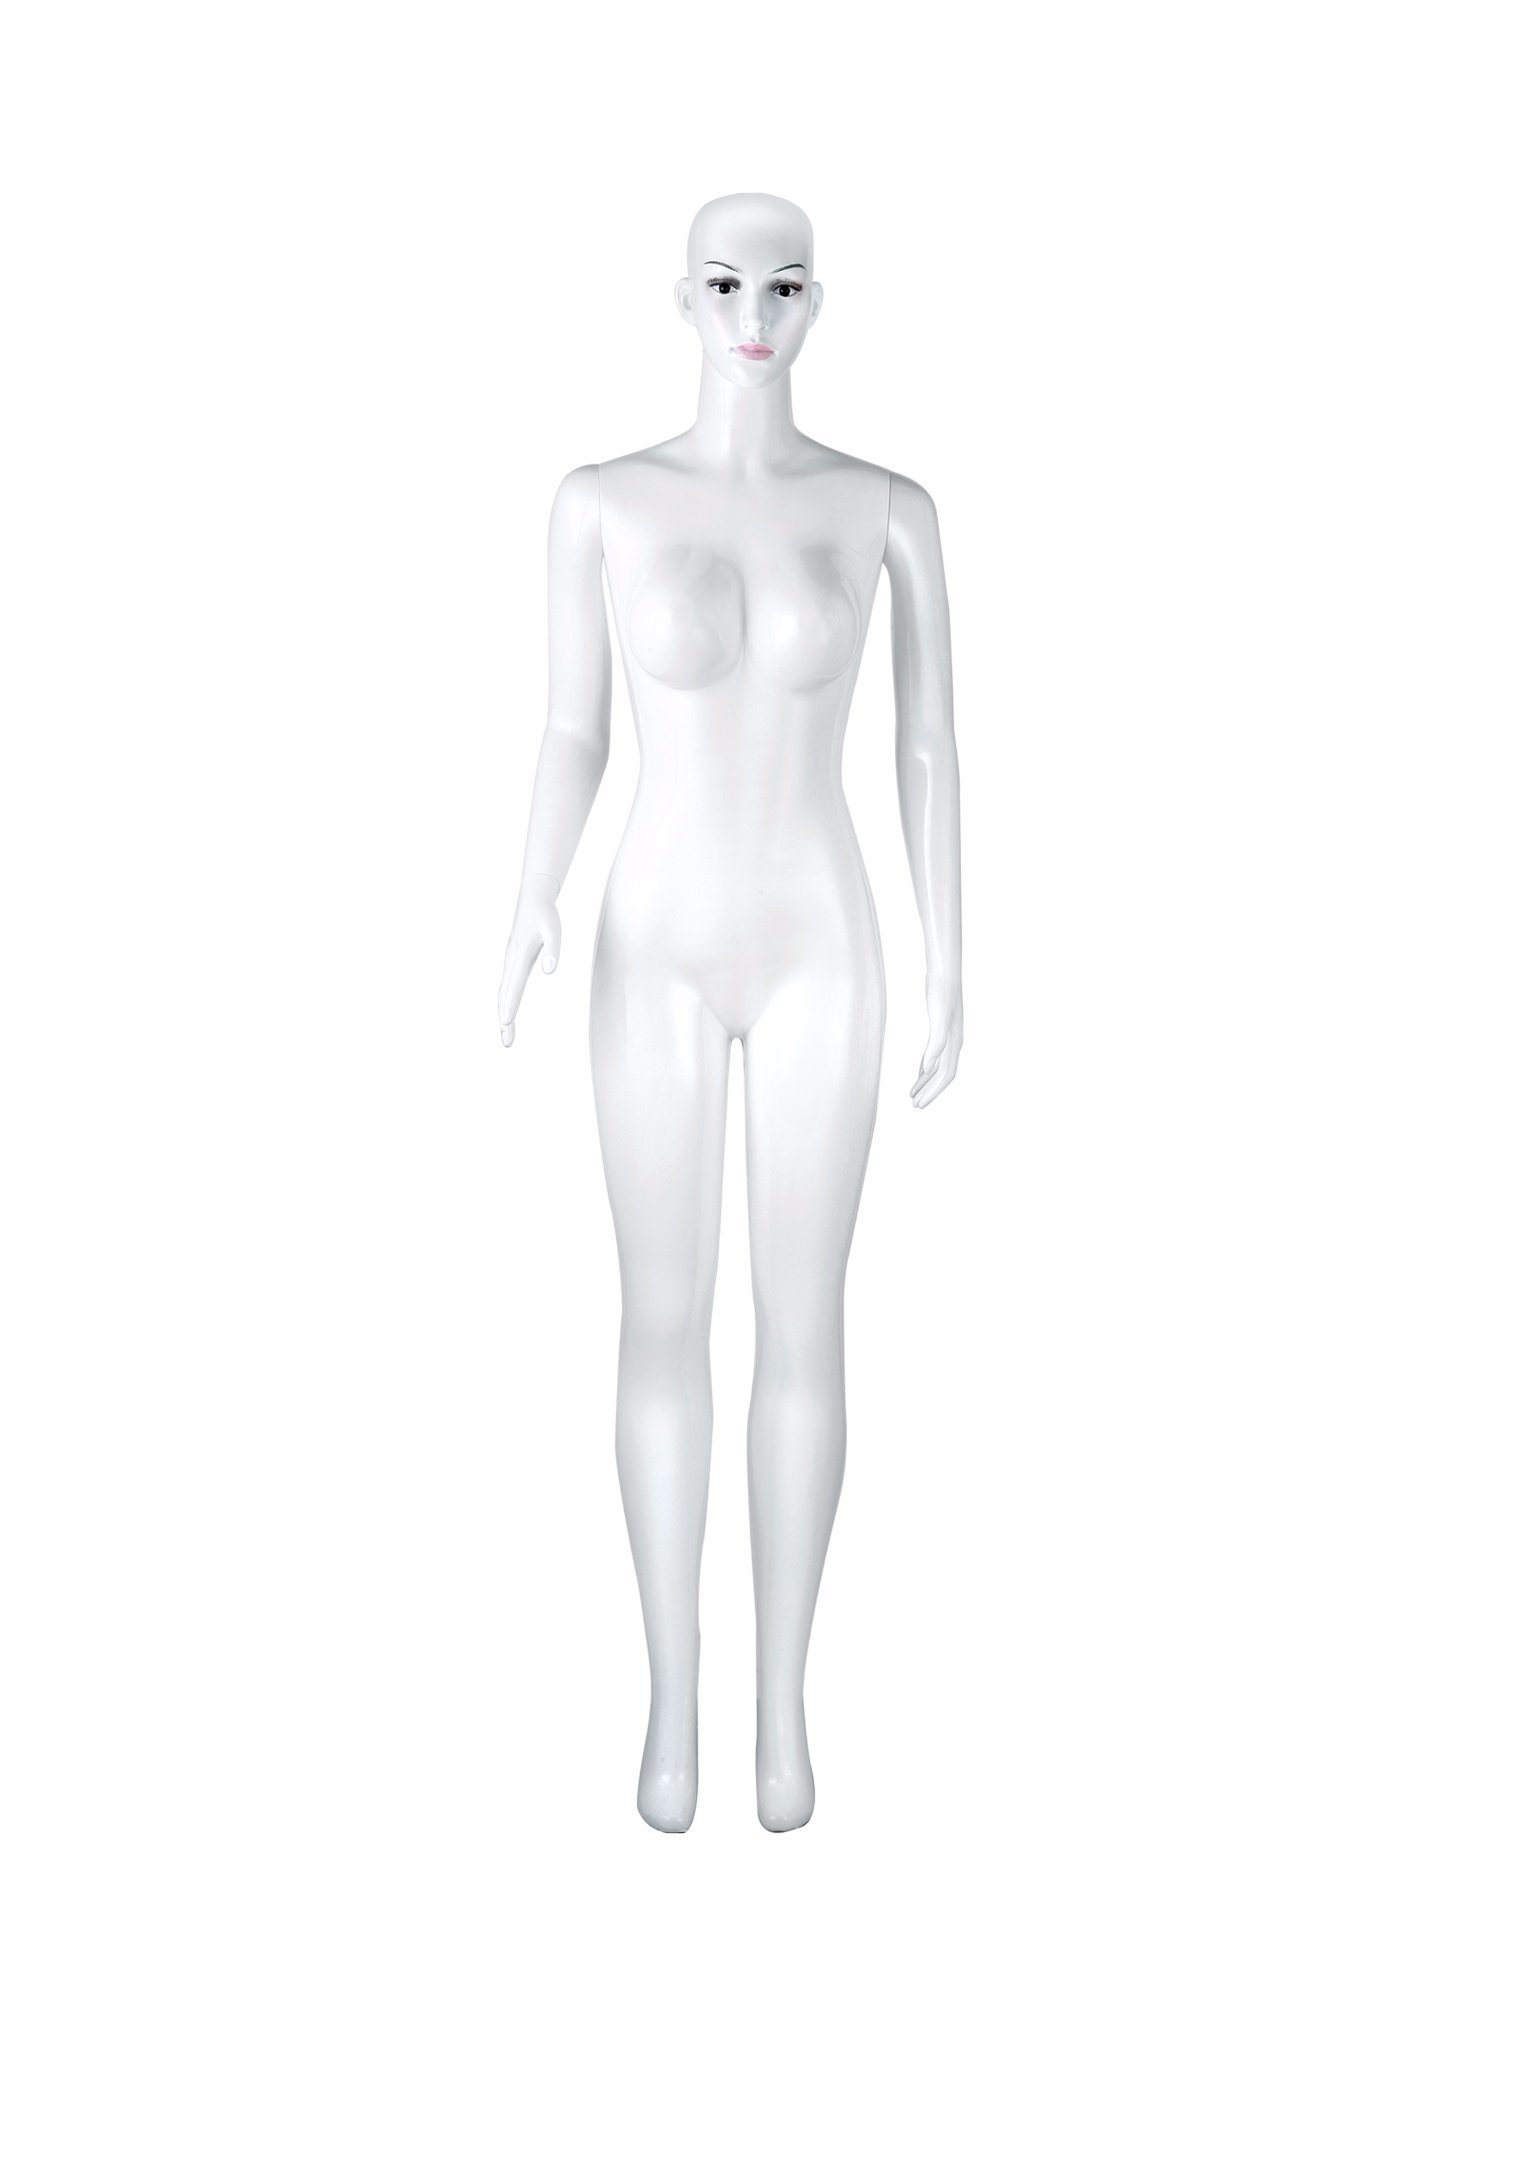 Cheap Hotsale Bright White Female Mannequin with Makeup